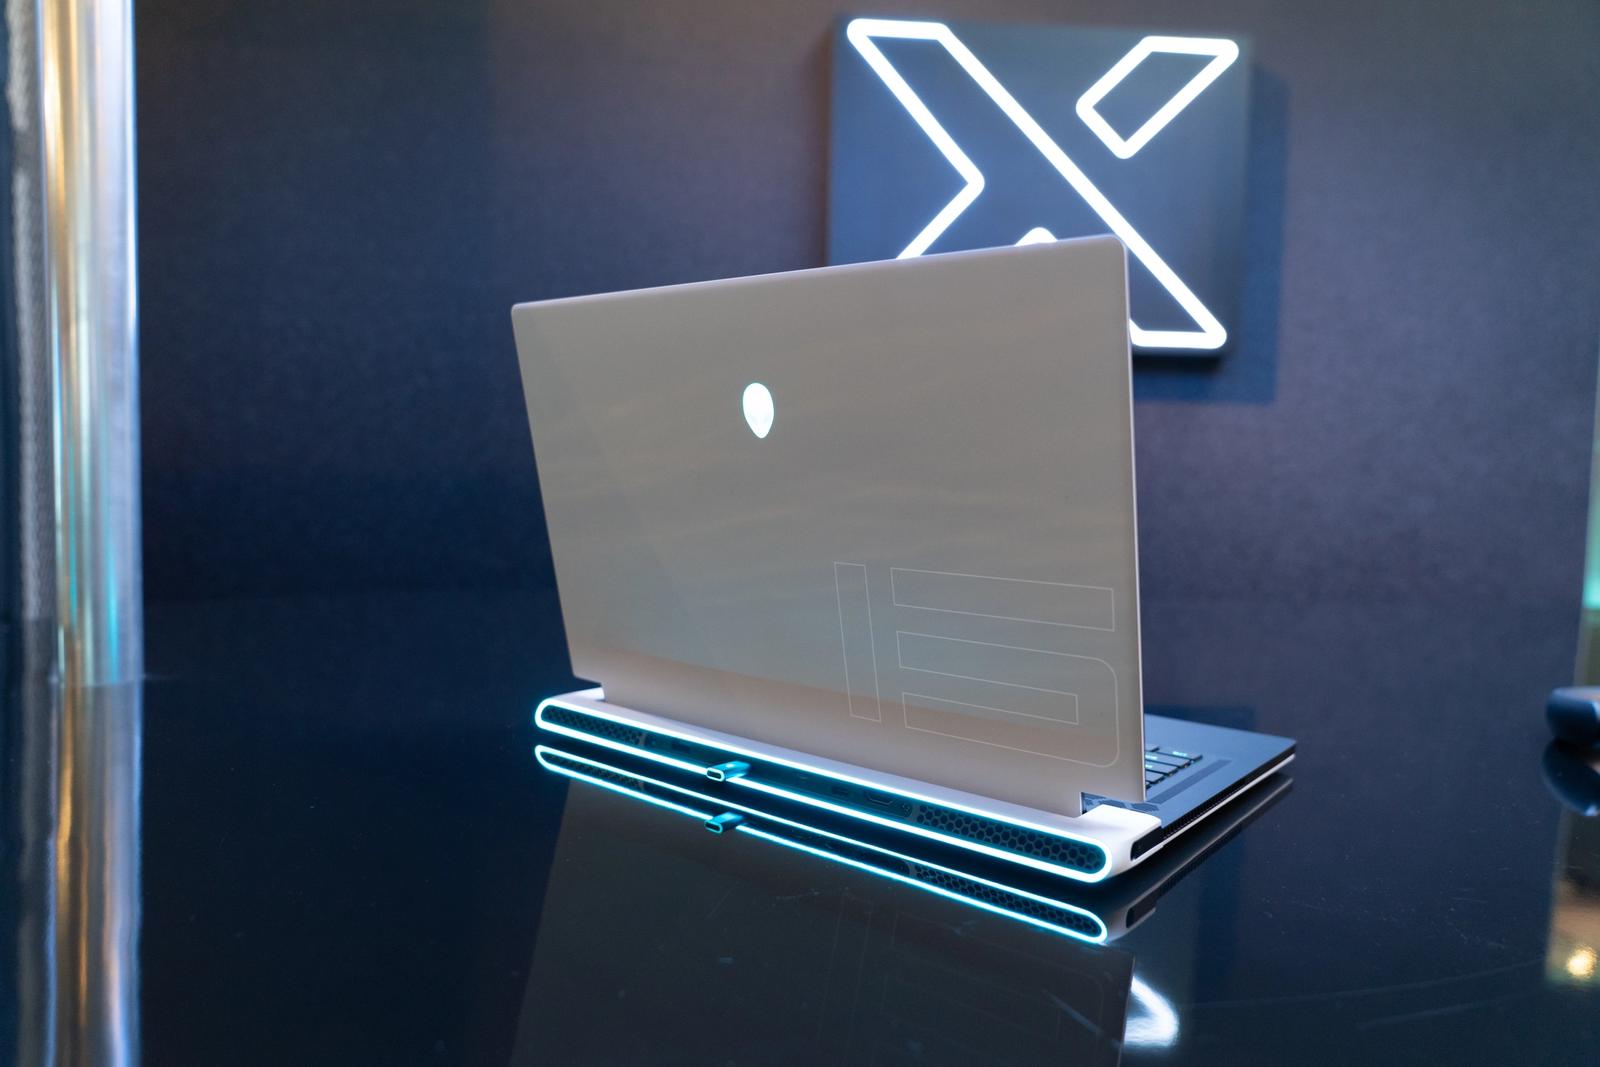 Alienware x15 R2 Review - Space Oddity